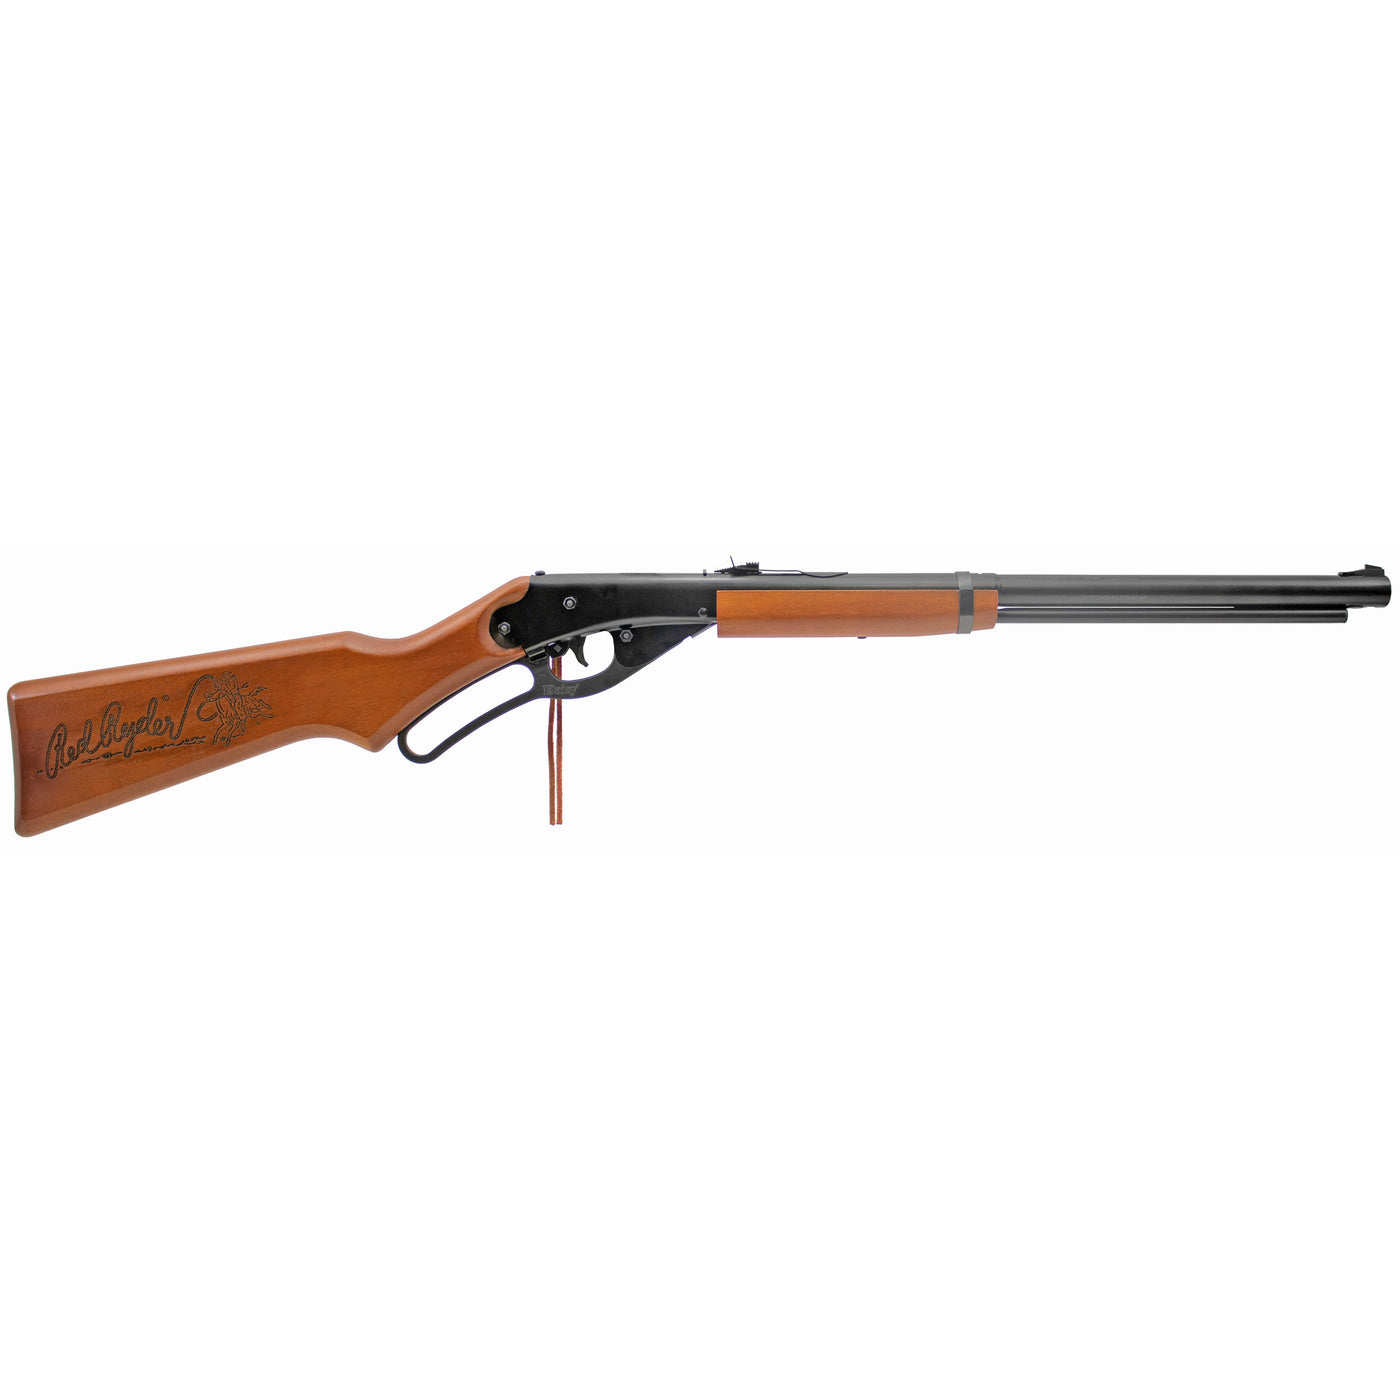 Daisy Model Adult Red Ryder - 1938 Bb Repeater Rifle